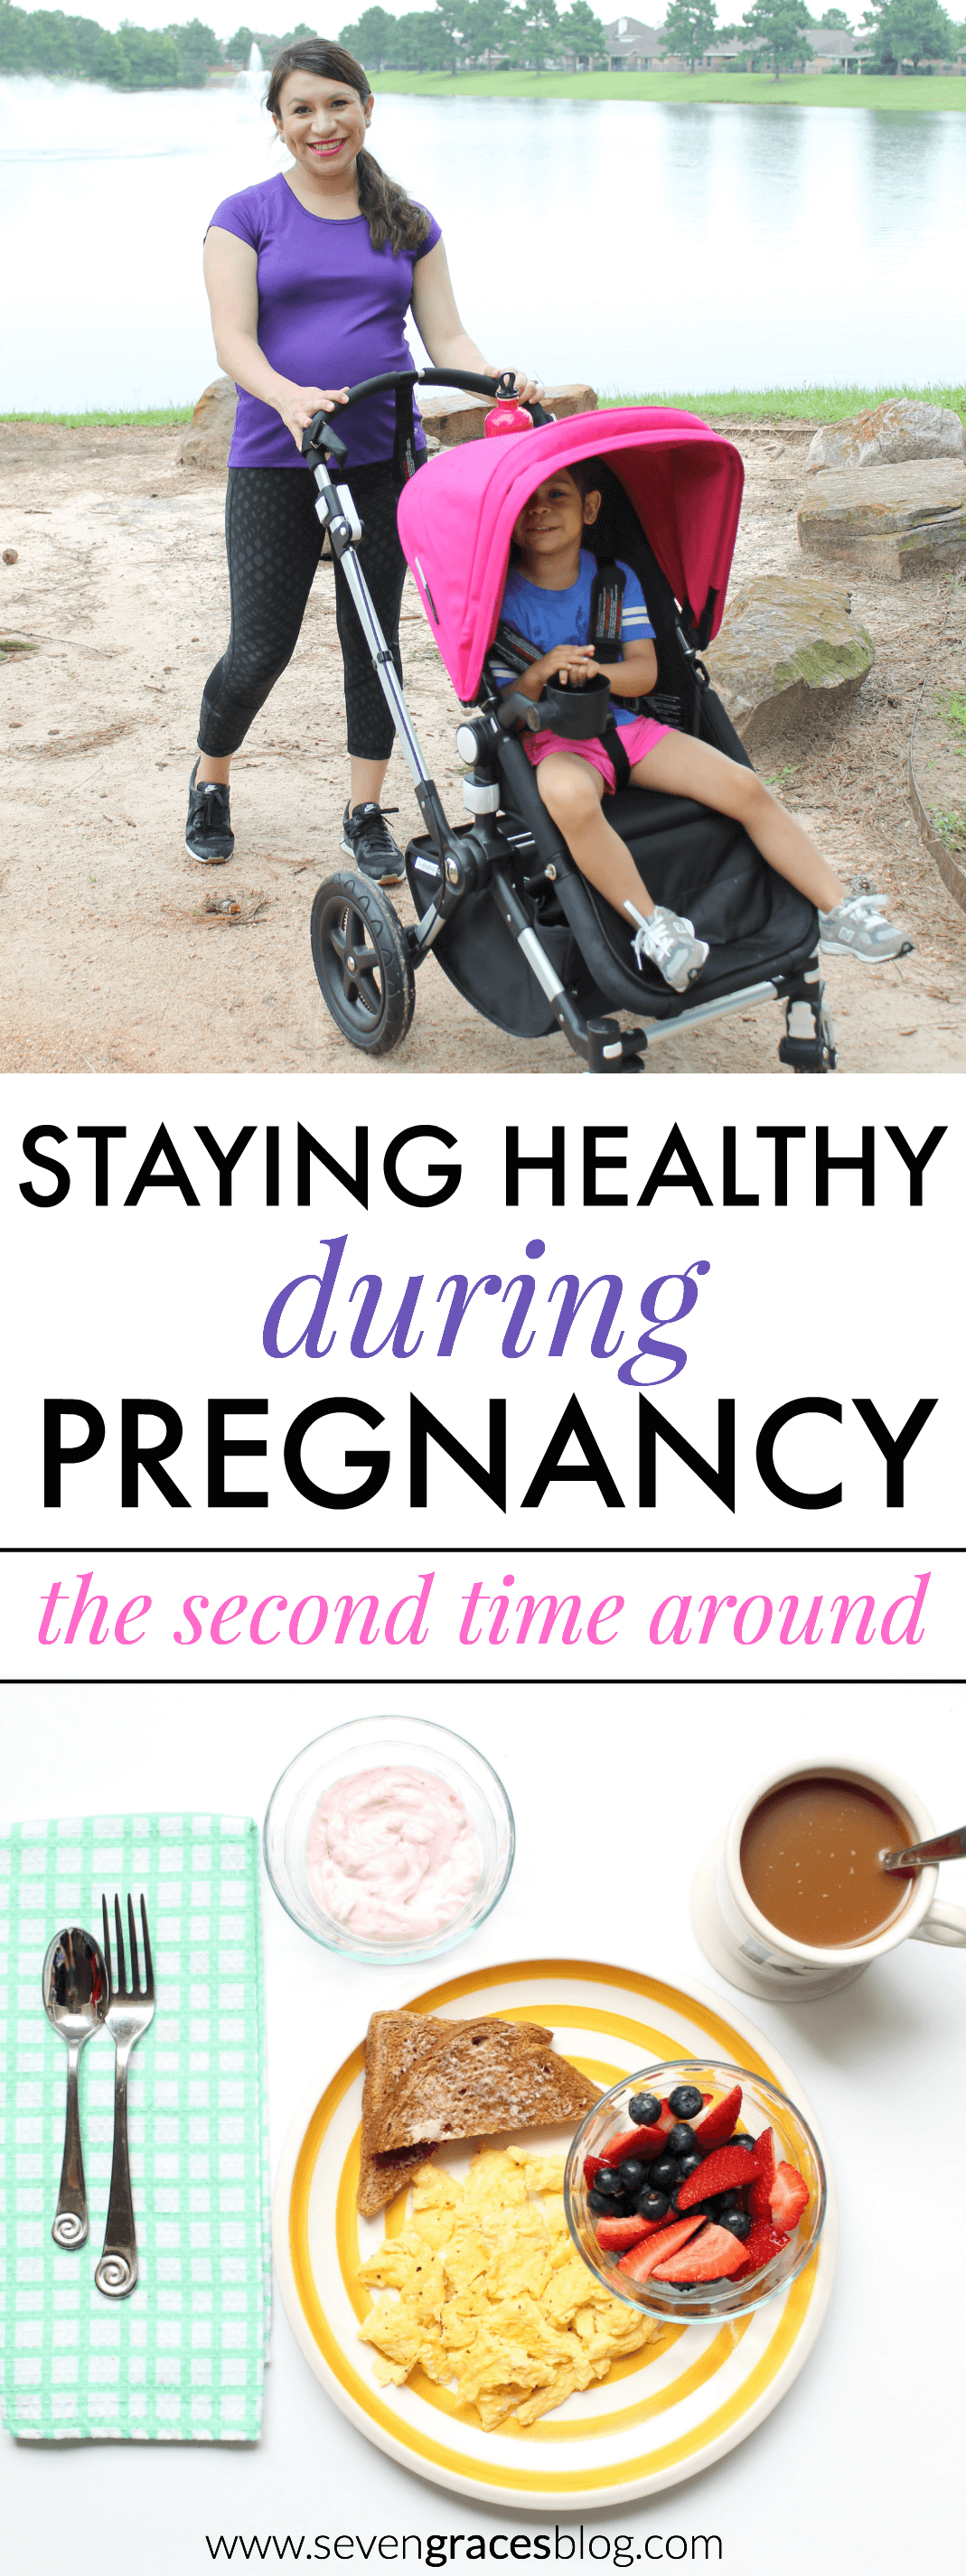 Staying Healthy During Pregnancy: the second time around. How one mom stays fit using basic health tips to navigate her pregnancy journey. 